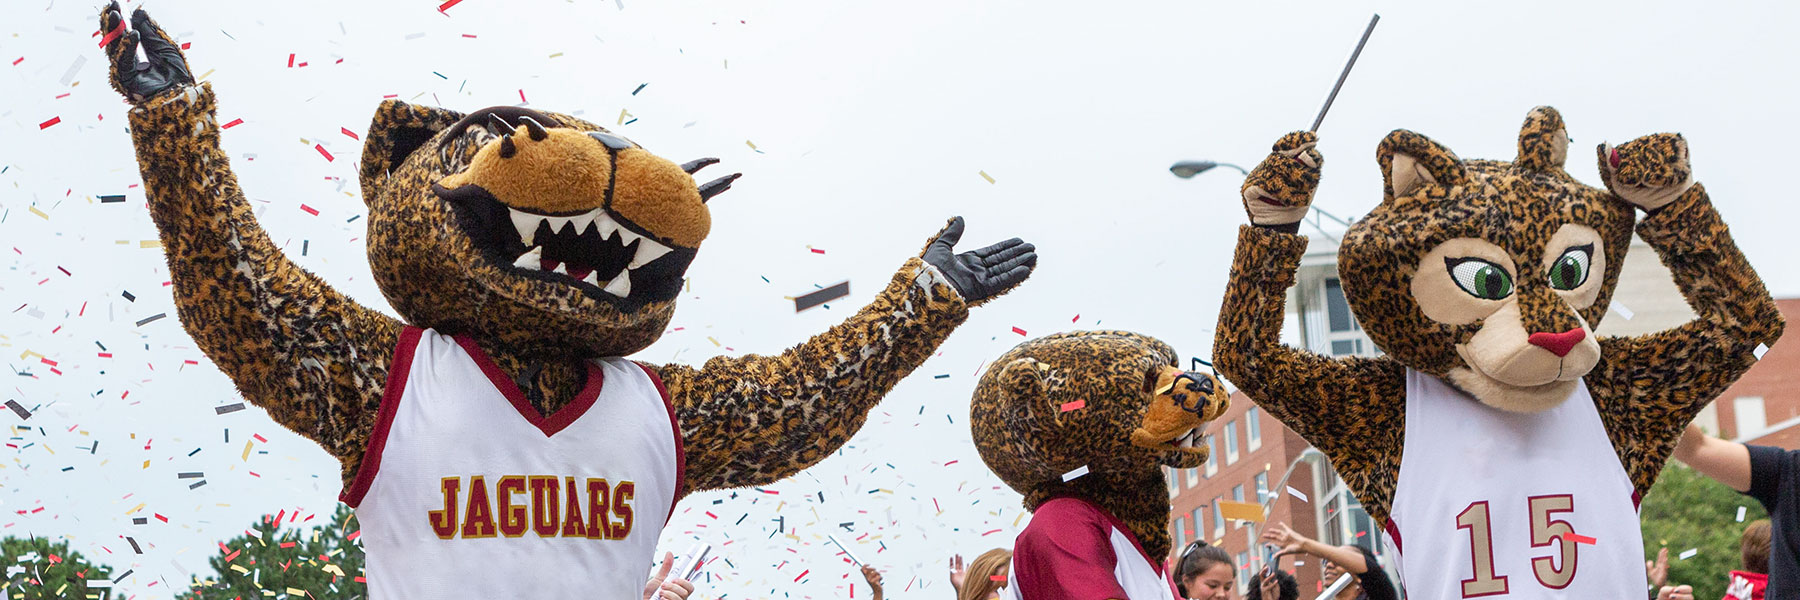 IU Indianapolis Jaguar mascots Jawz, Jazzy, and Jinx, walk down a parade route in Indianapolis. Jawz and Jazzy are in the foreground and are making celebratory motions with their arms. Jinx has slowed down to interact with a person in the crowd. A multitude of confetti is falling from the sky.